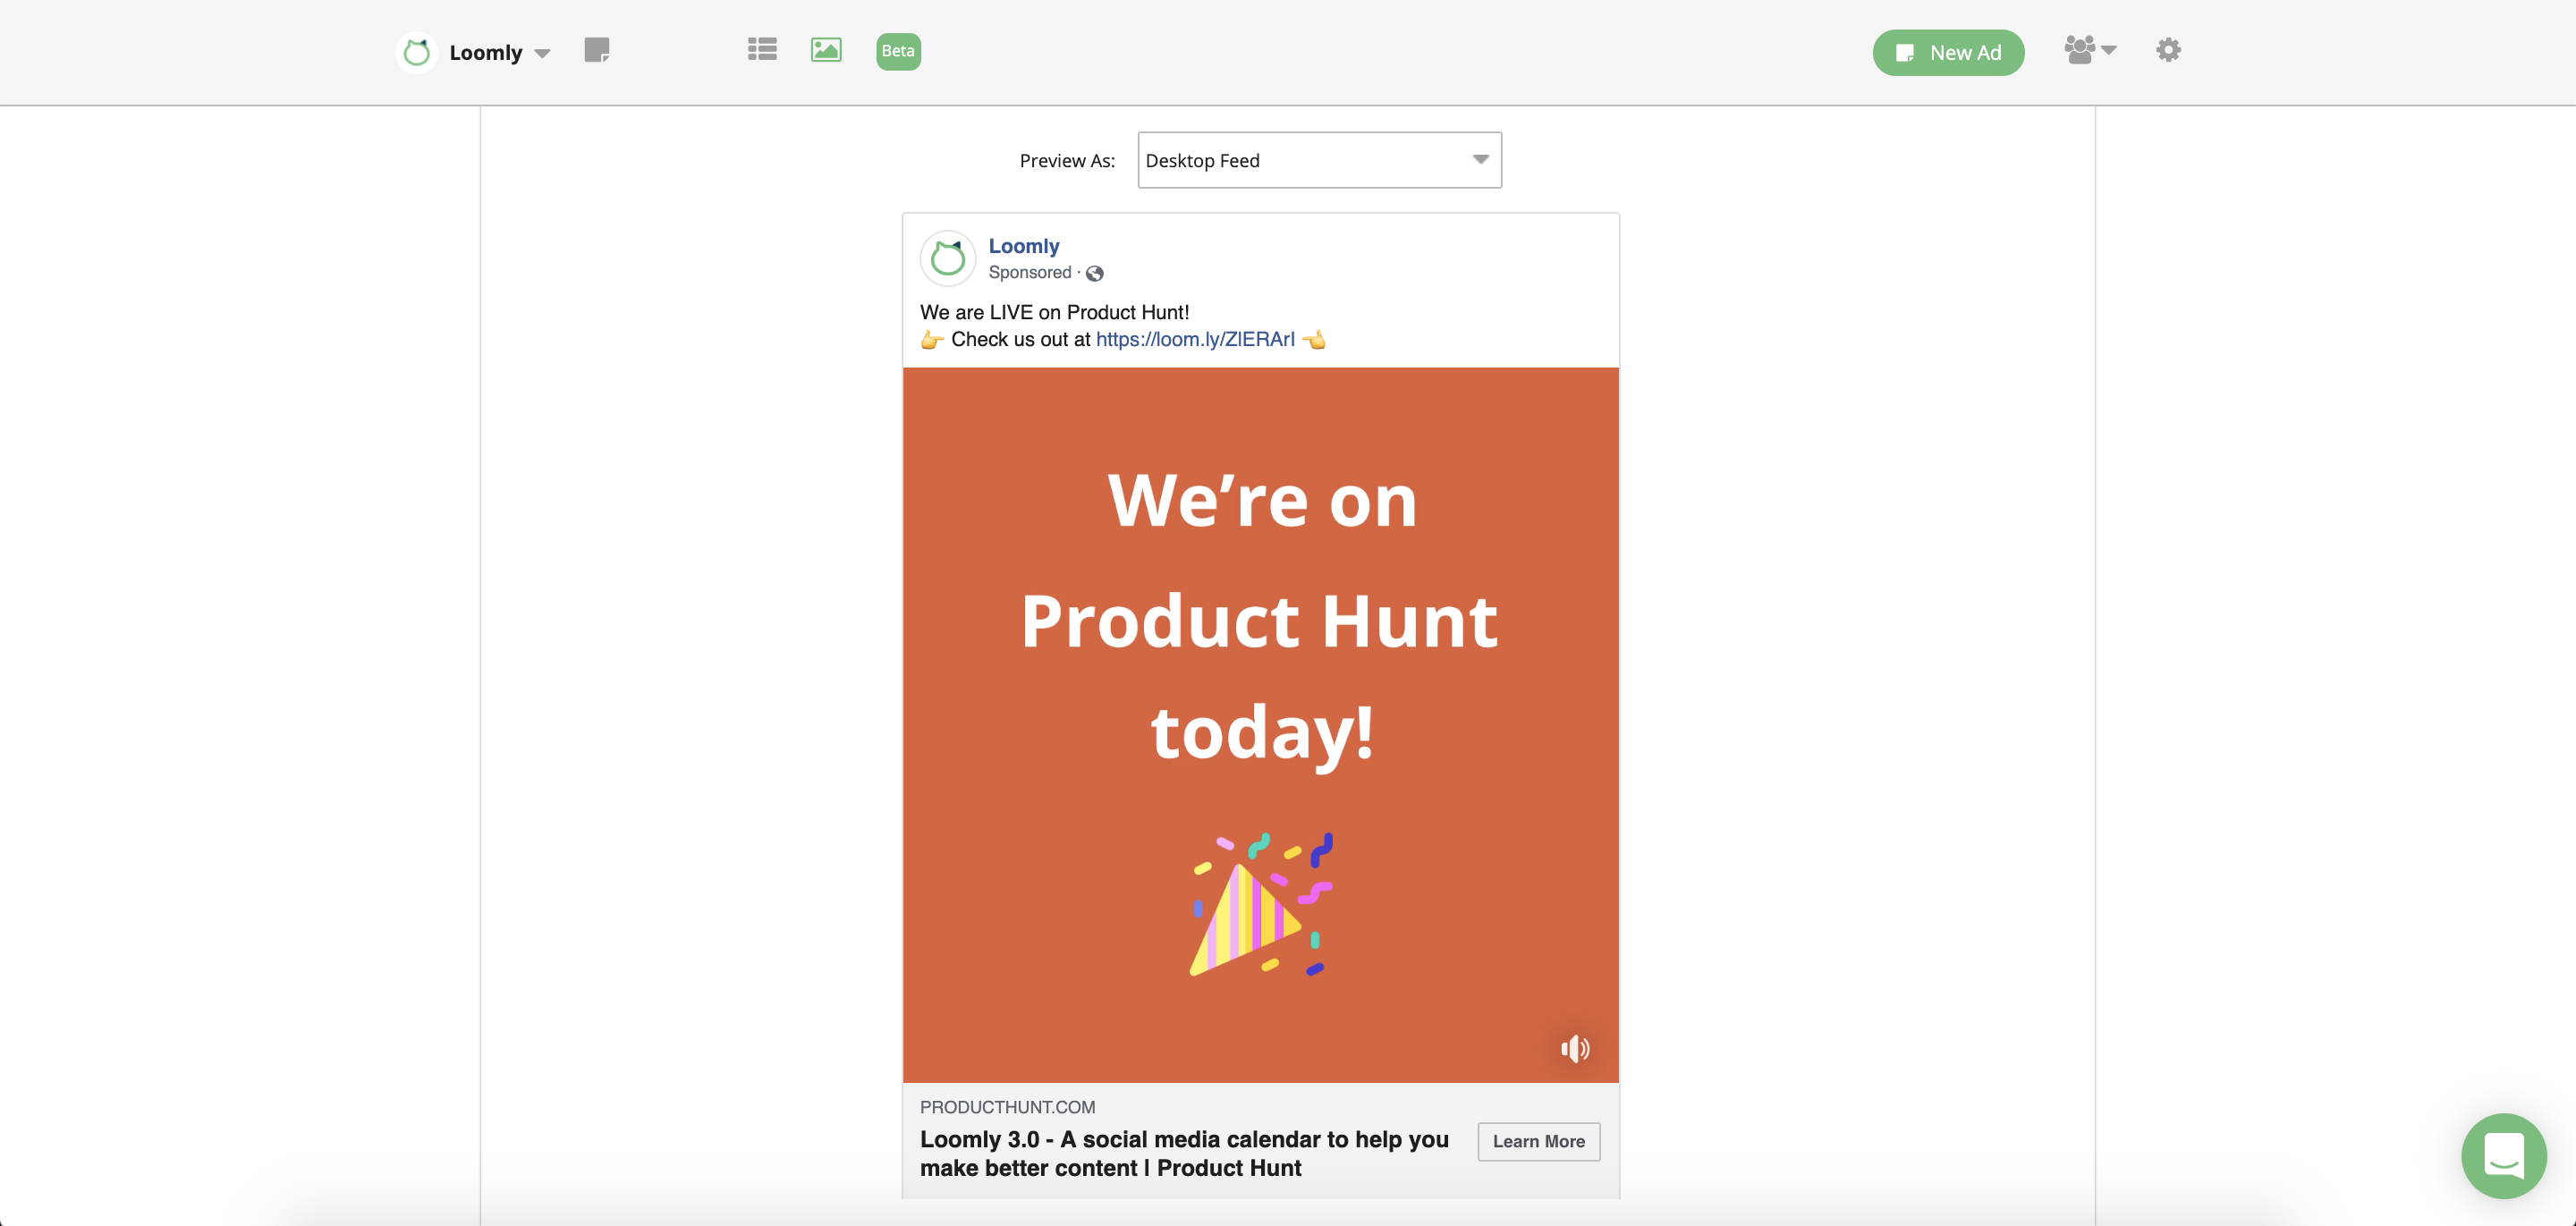 Facebook Video Ads Example Loomly Product Hunt Campaign